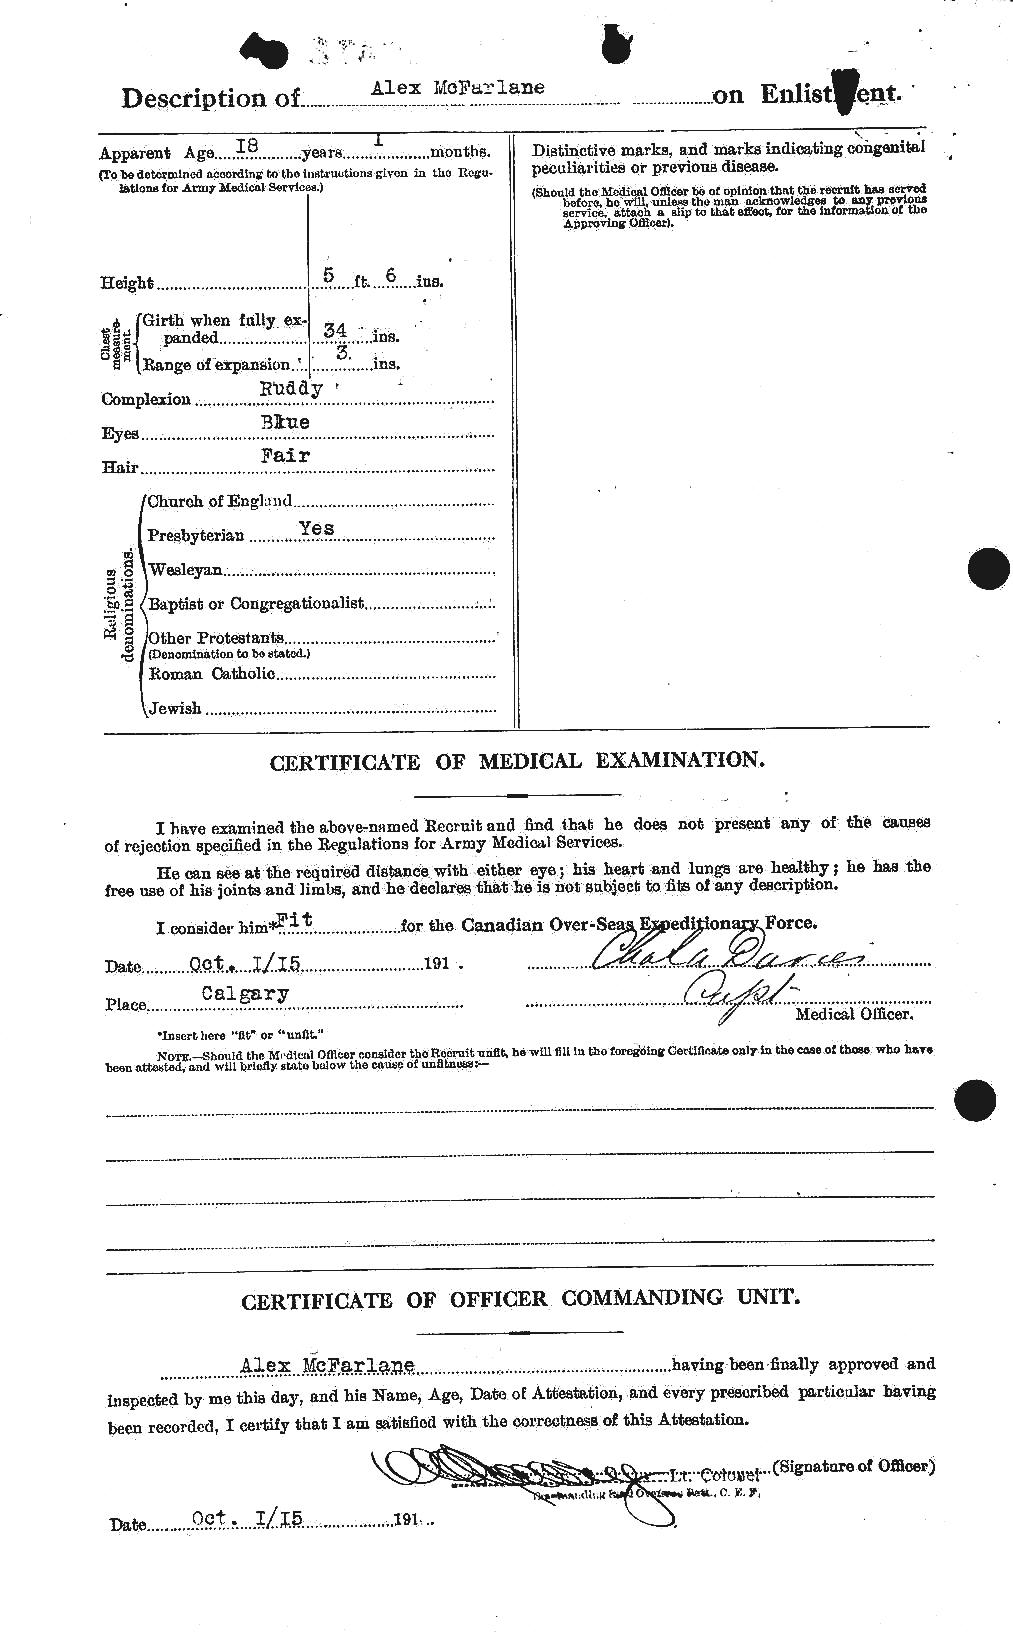 Personnel Records of the First World War - CEF 521685b